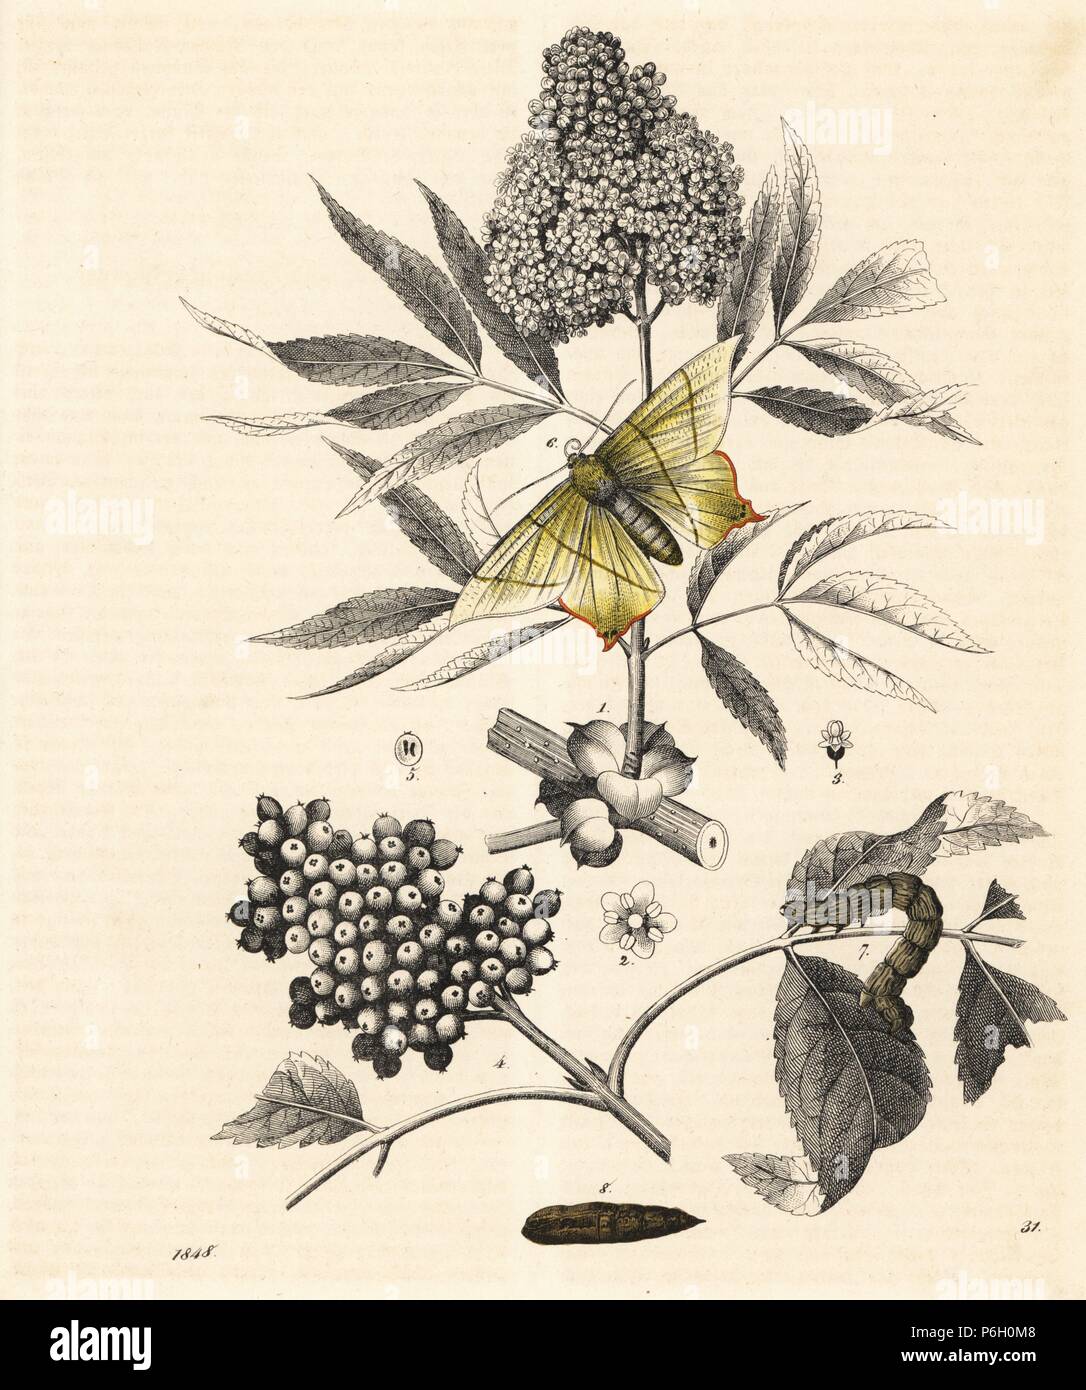 Elder tree, Sambucus nigra, with berries and flowers, and swallow-tailed moth and caterpillar, Ourapteryx sambucaria (Geometra sambucaria). Handcoloured lithograph from Carl Hoffmann's Book of the World, Stuttgart, 1848. Stock Photo